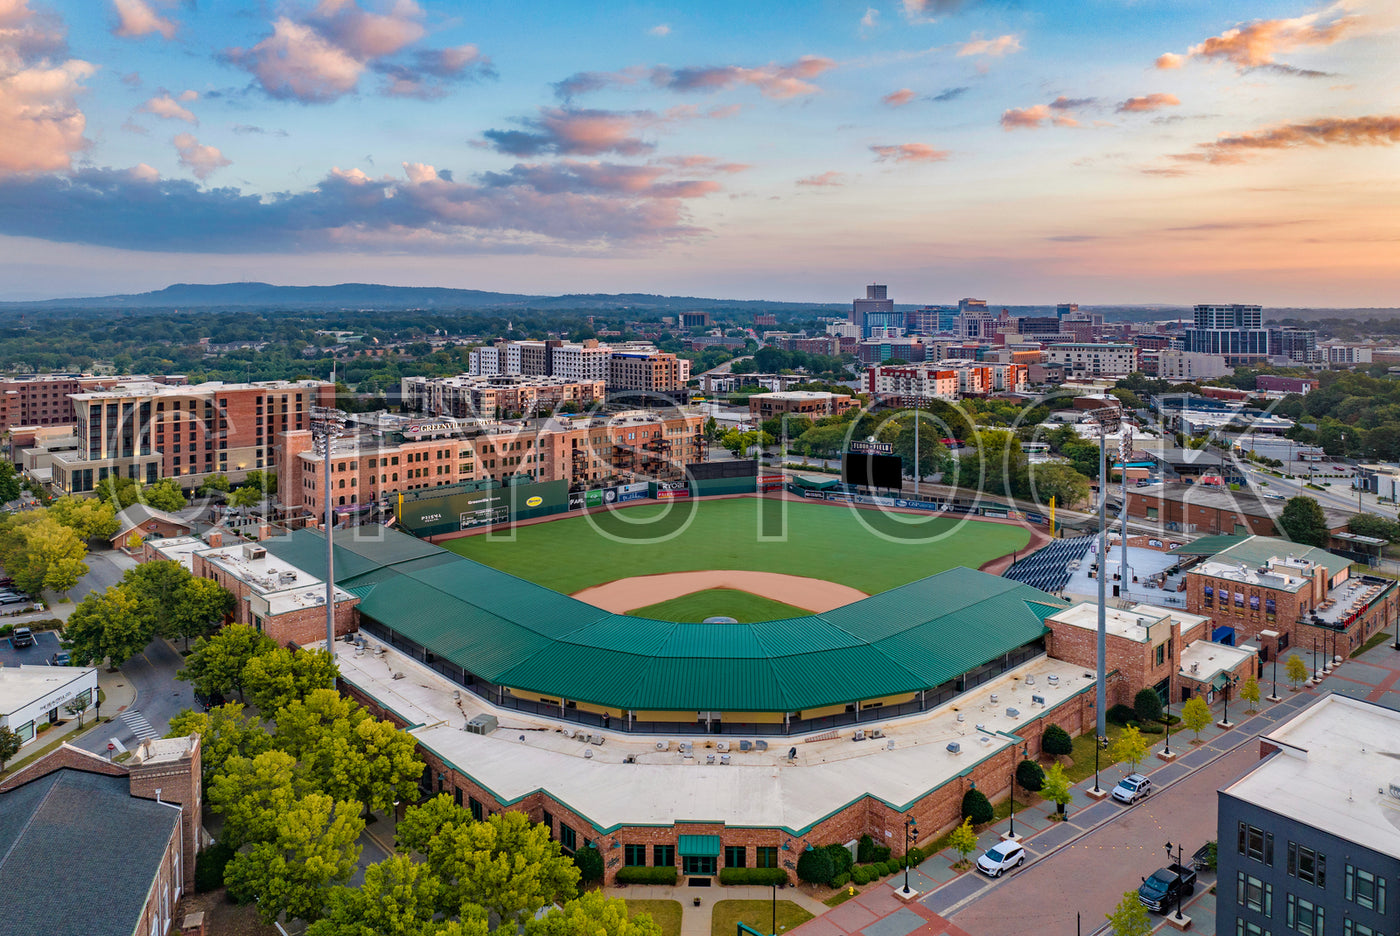 Aerial view of Greenville baseball stadium and city at sunset